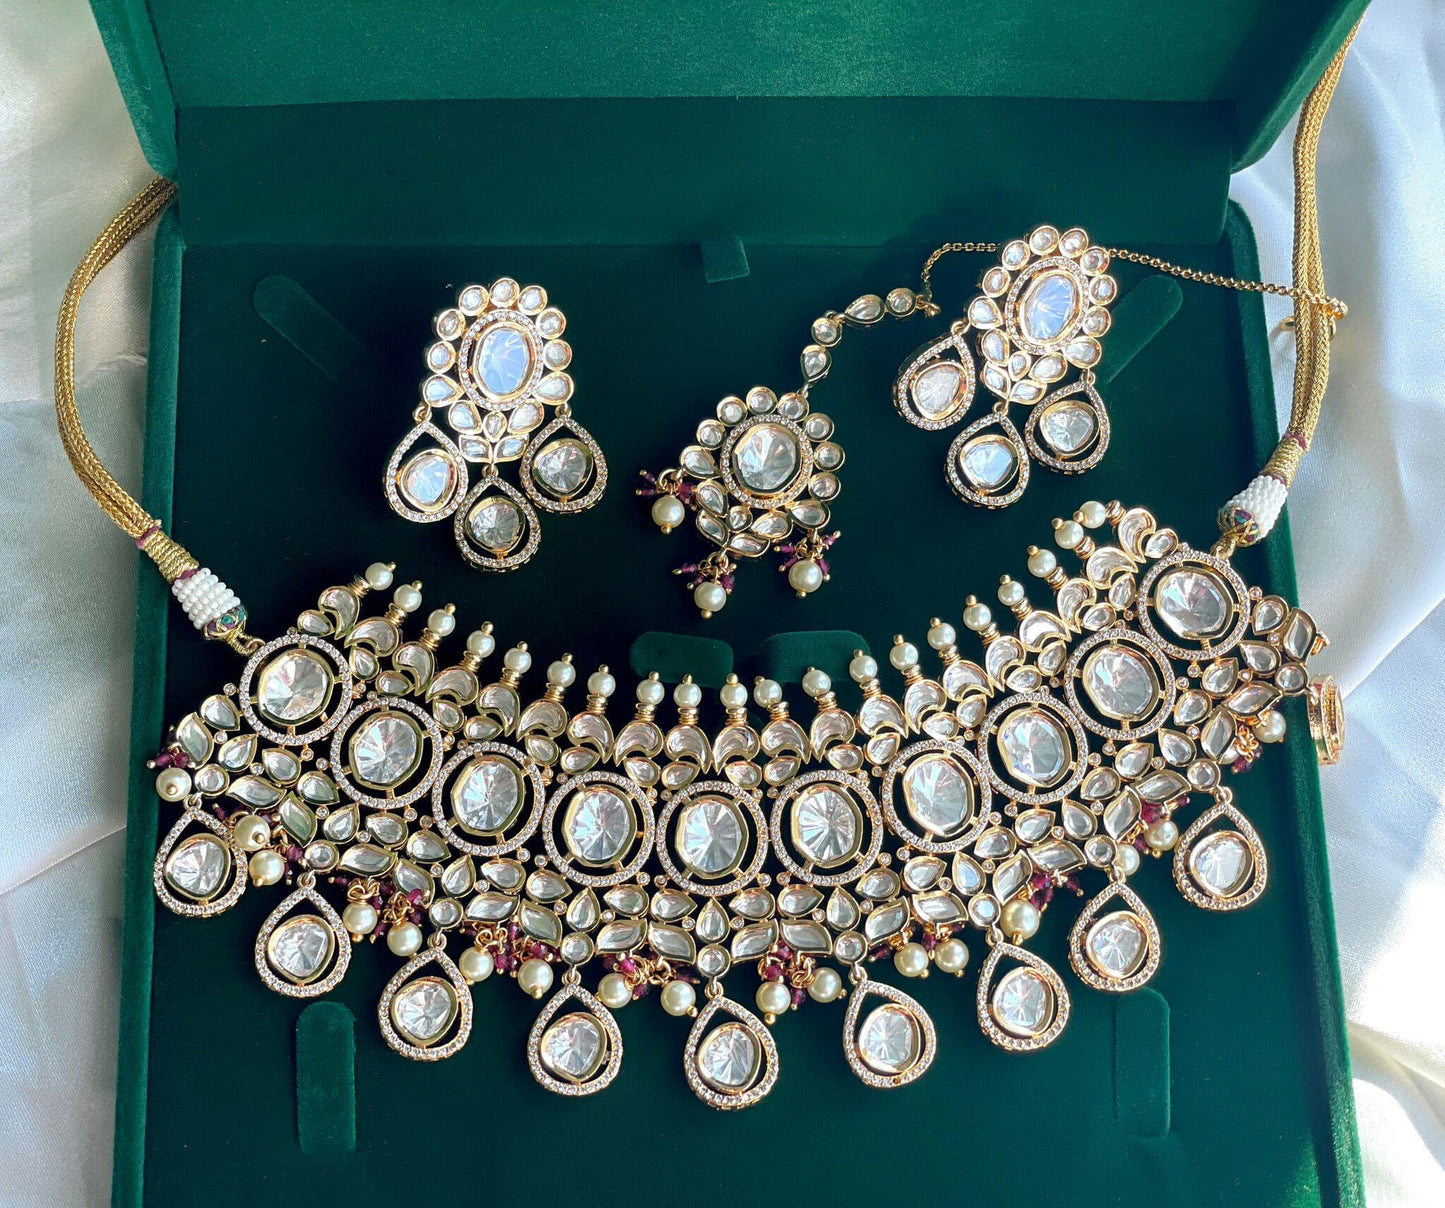 An elegant heavy necklace along with beautiful earrings